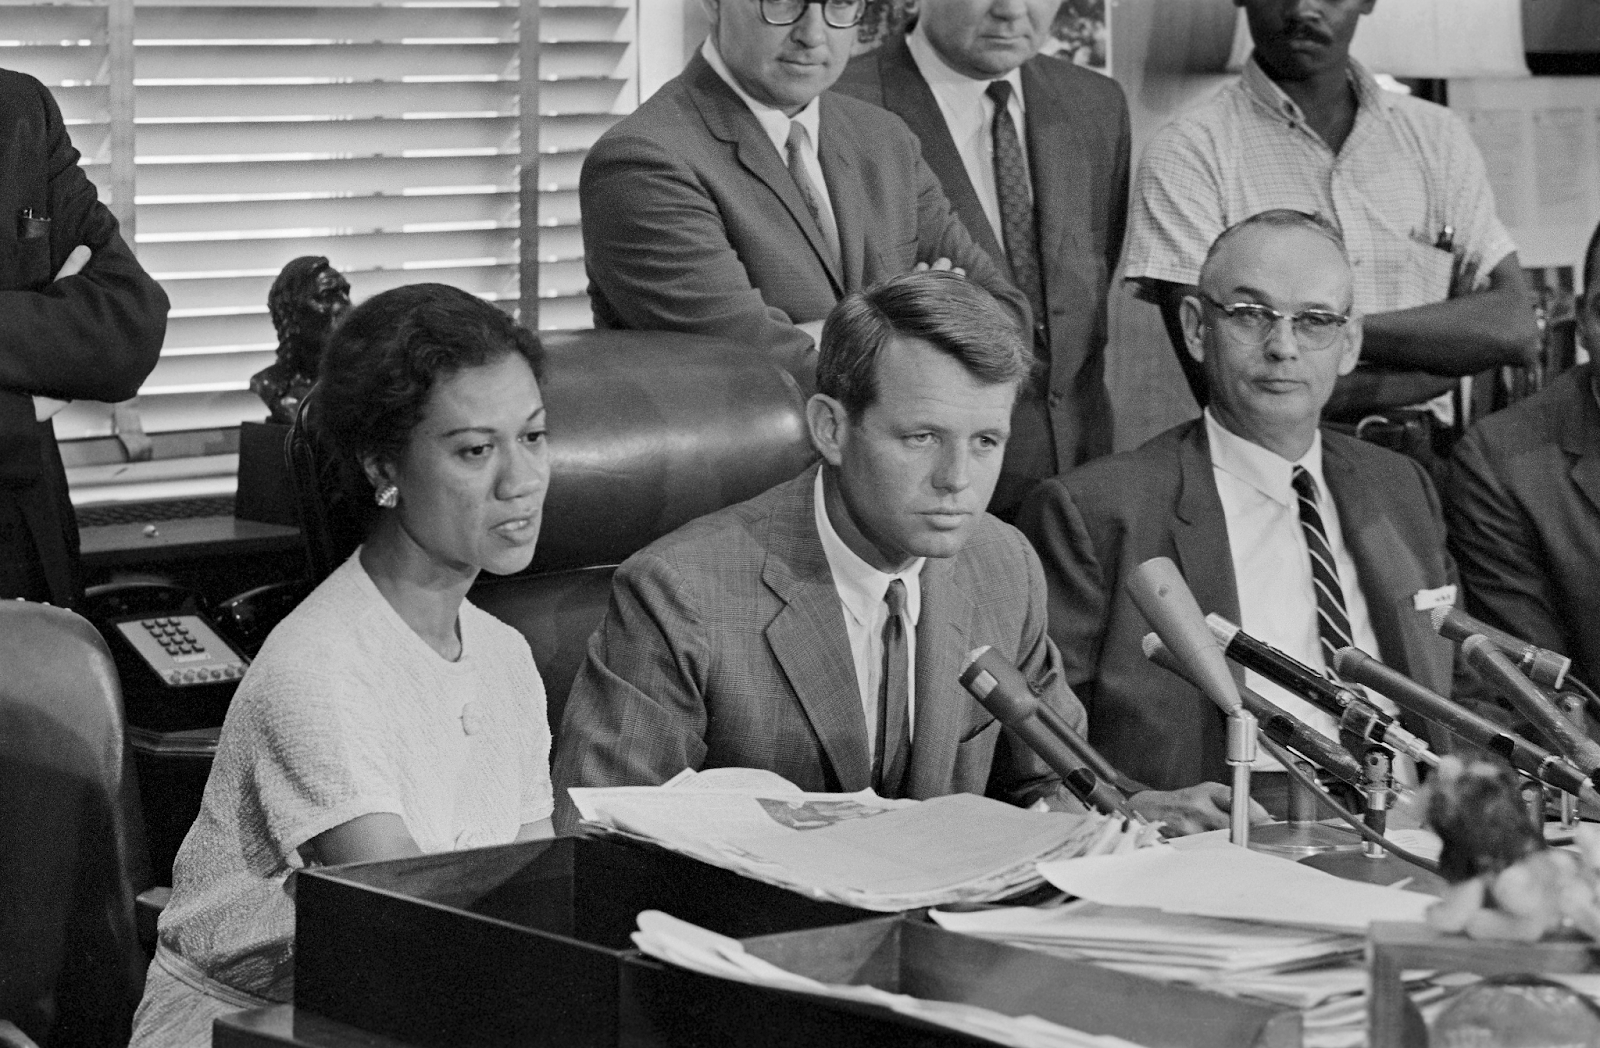  Richardson with then-Attorney General Robert F. Kennedy in 1963. (Bettmann Archive/Getty Images) 